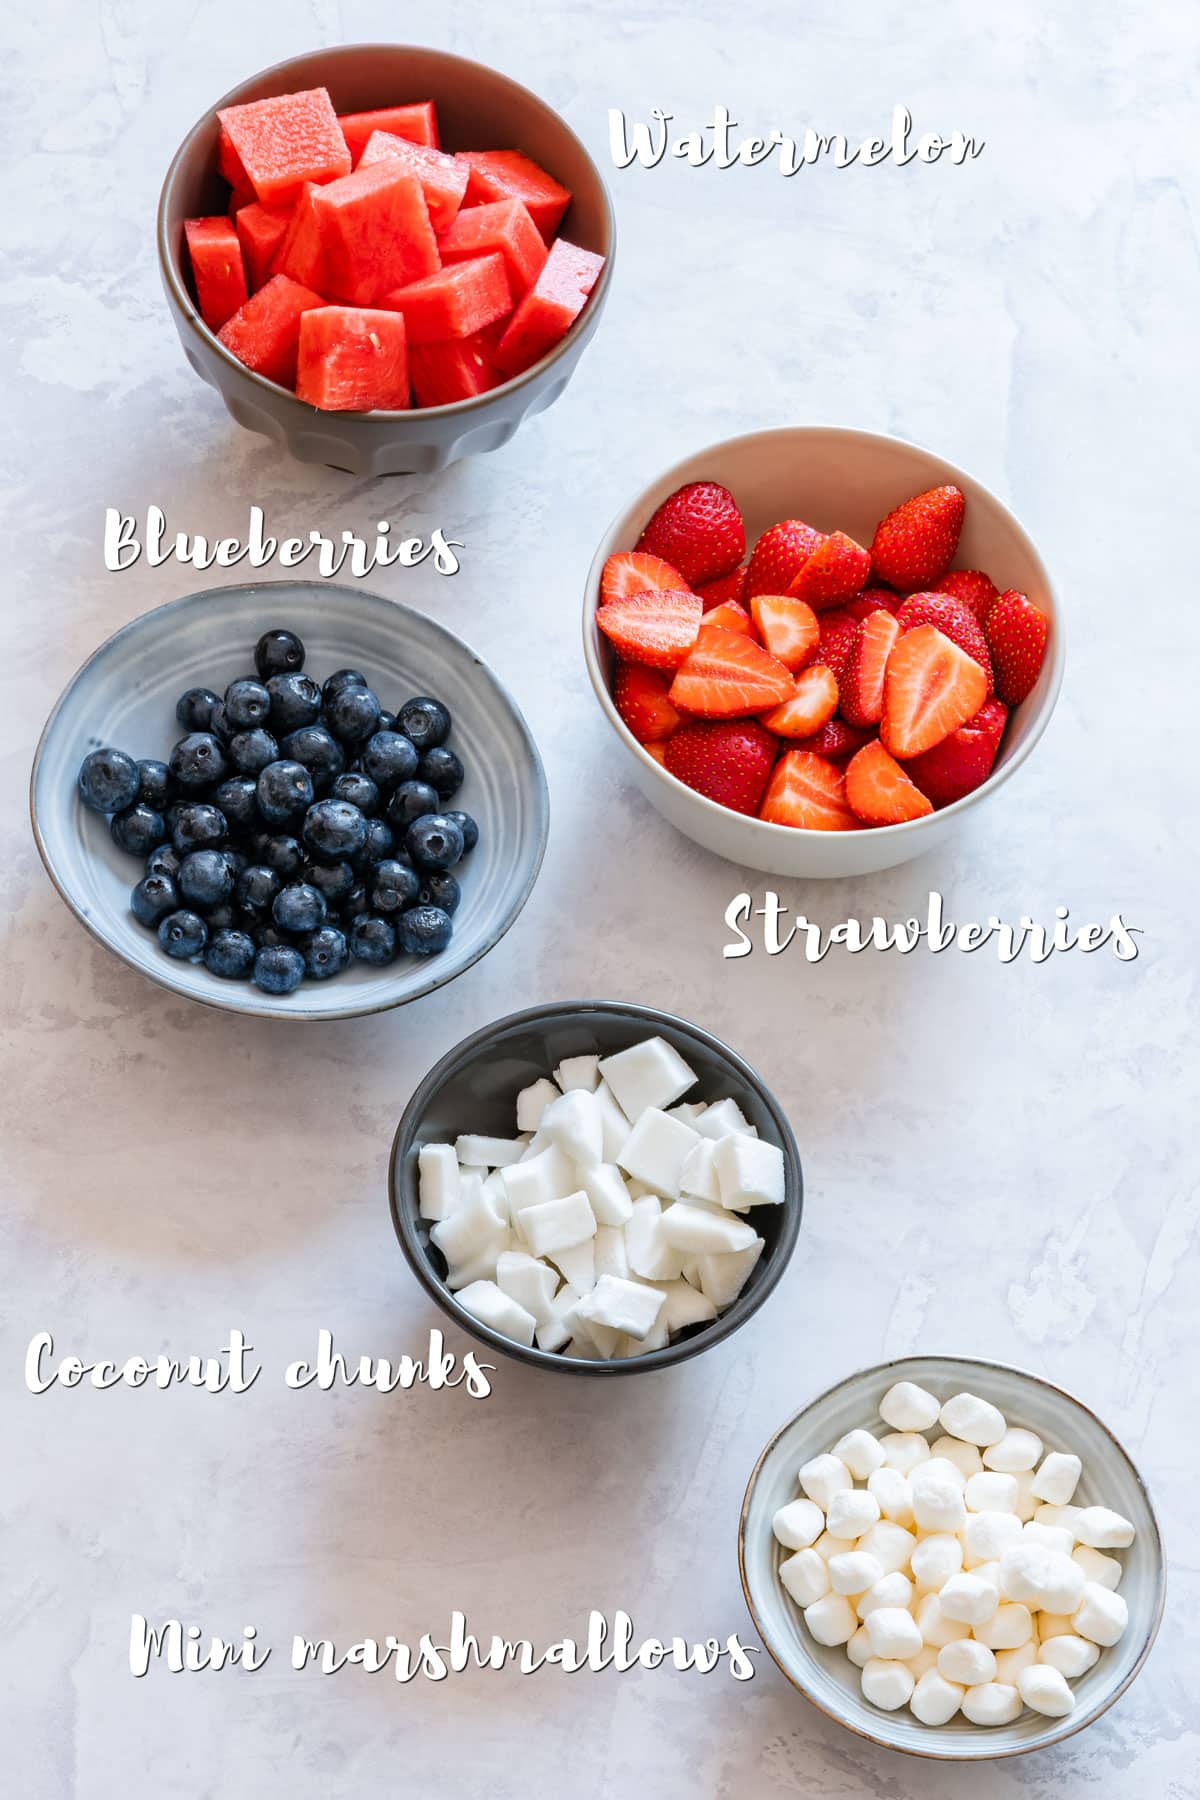 Ingredients for 4th of July fruit platter: strawberries, watermelon, blueberries, coconut chunks and marshmallows.